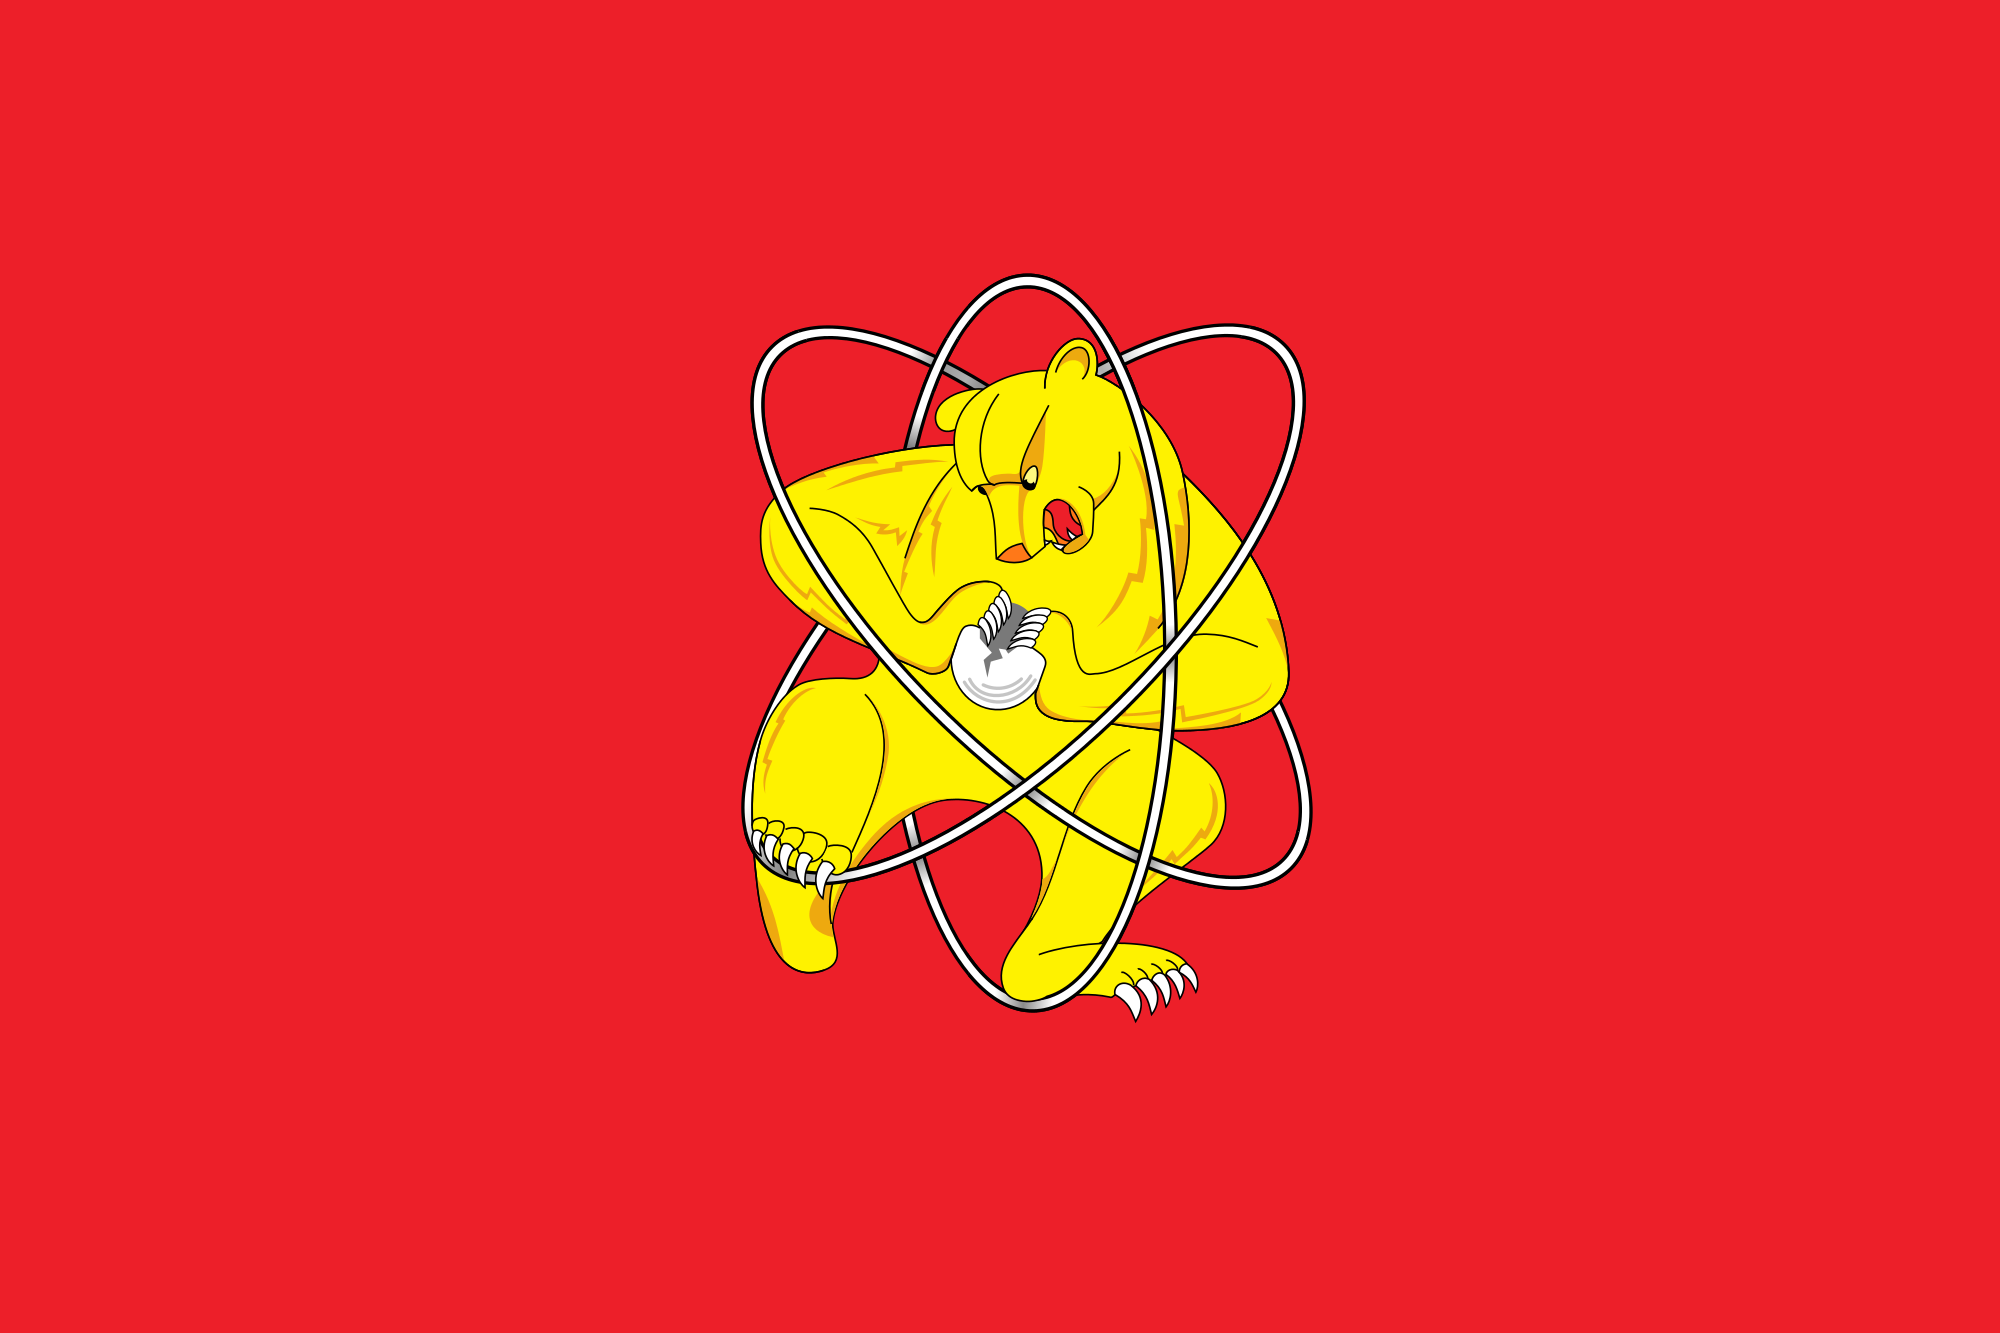 General 2000x1333 grizzly bear minimalism humor atoms animals mammals red background simple background nuclear Russia